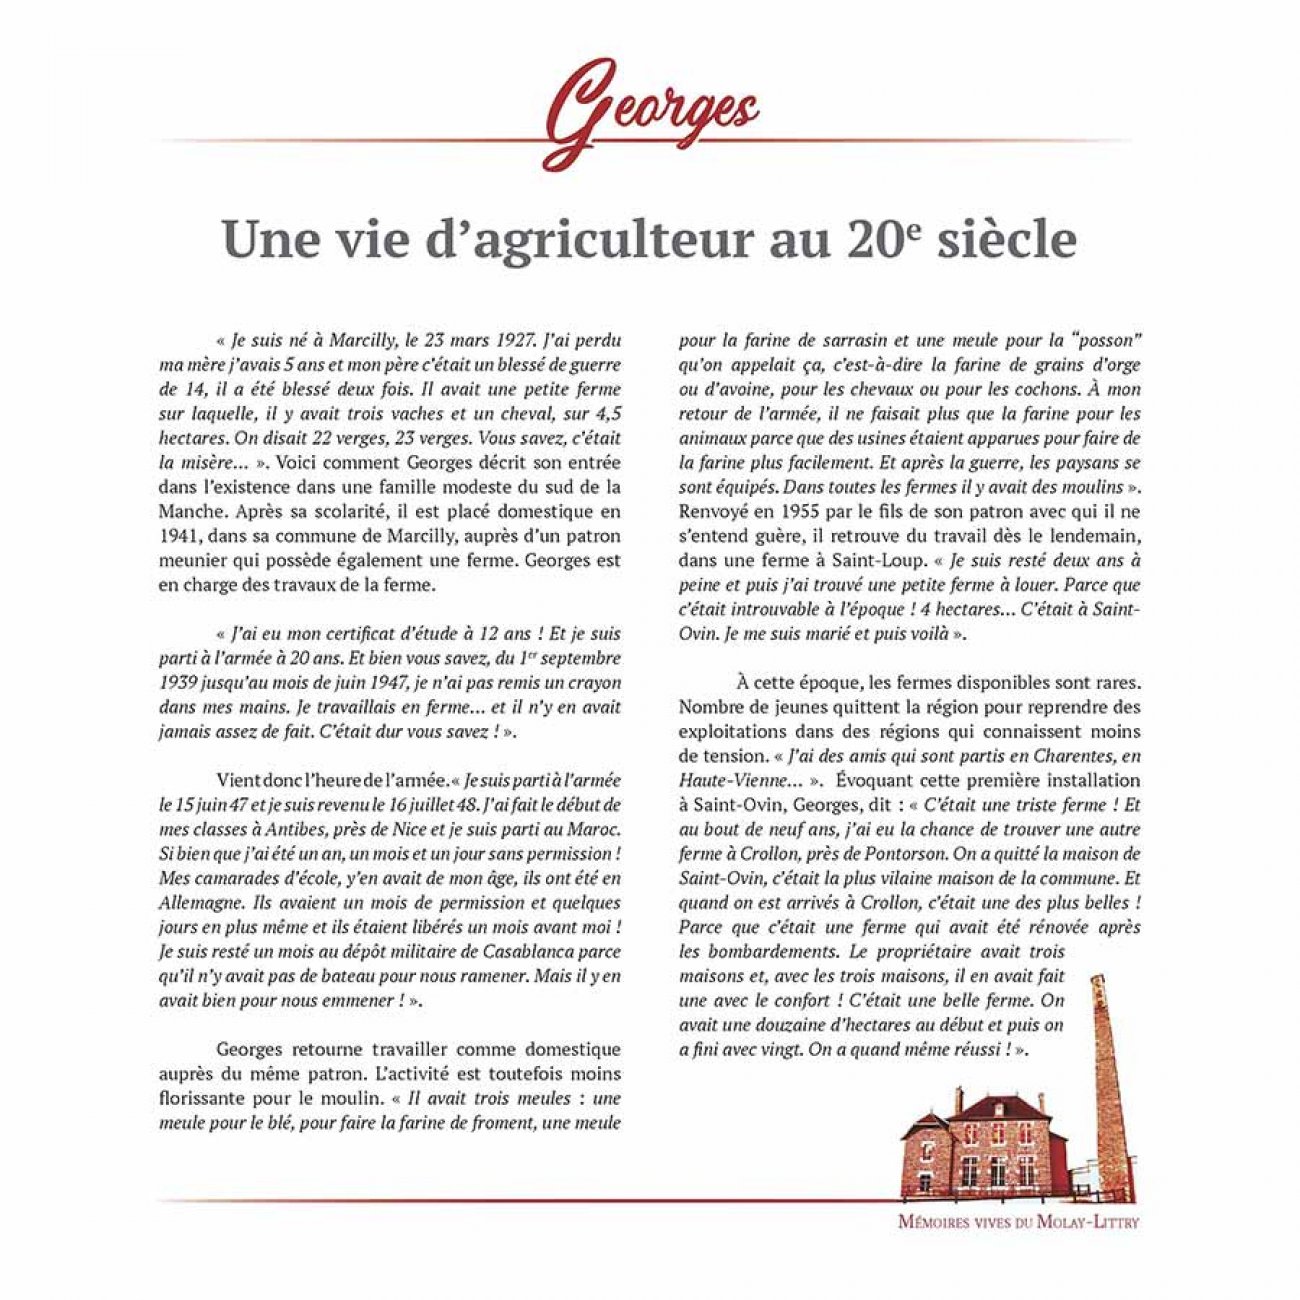 Expo-Molay-Littry-42 une vie d'agriculteur